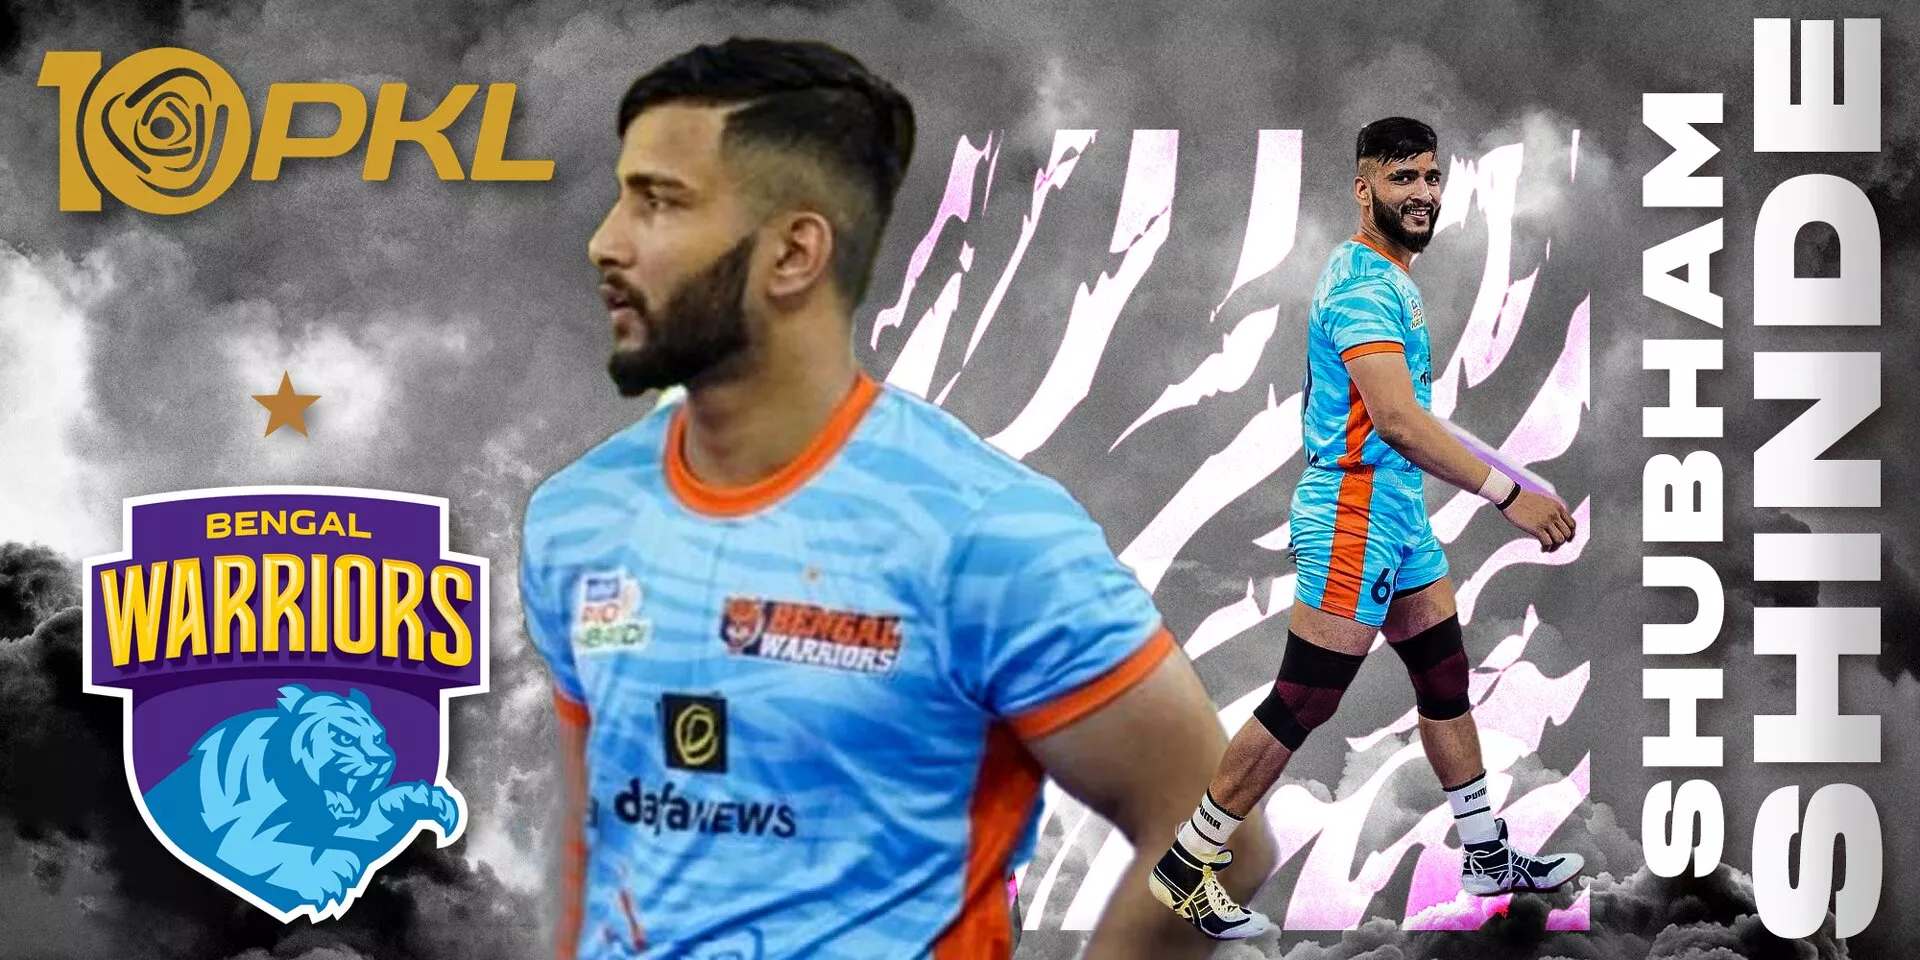 Exclusive: My aim is to win best defender award in PKL 10 says Shubham Shinde